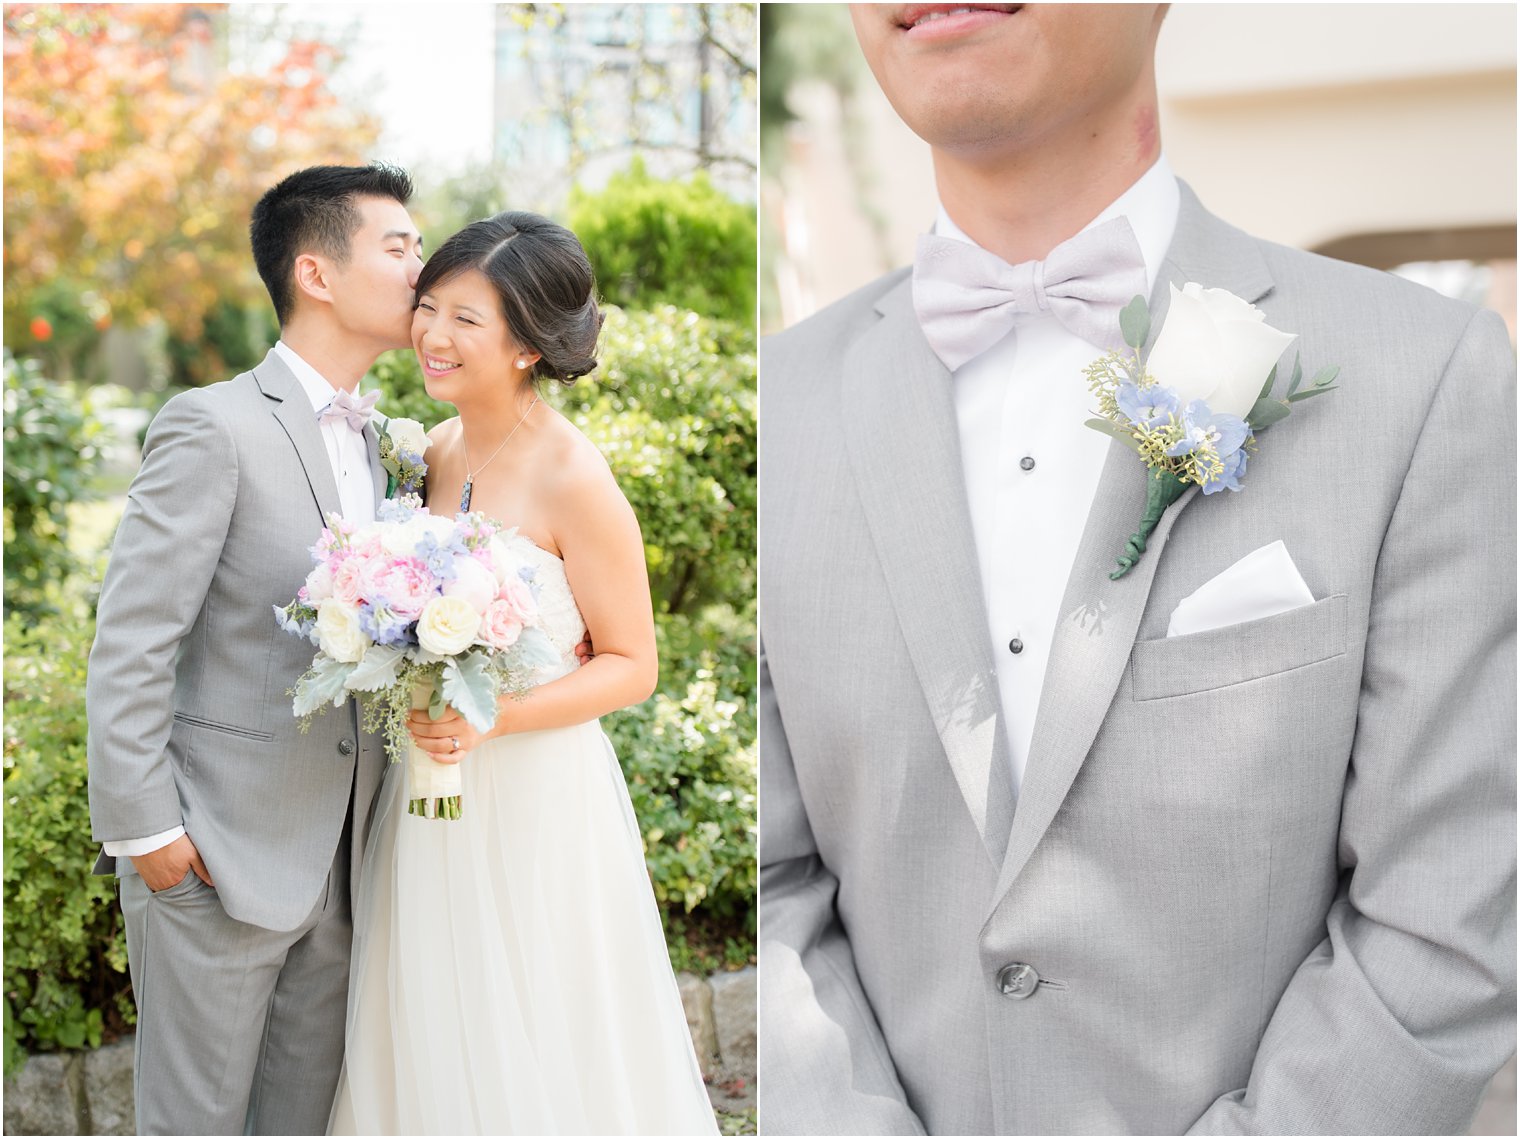 Pastel and grey wedding attire inspiration at The Bethwood in Totowa NJ